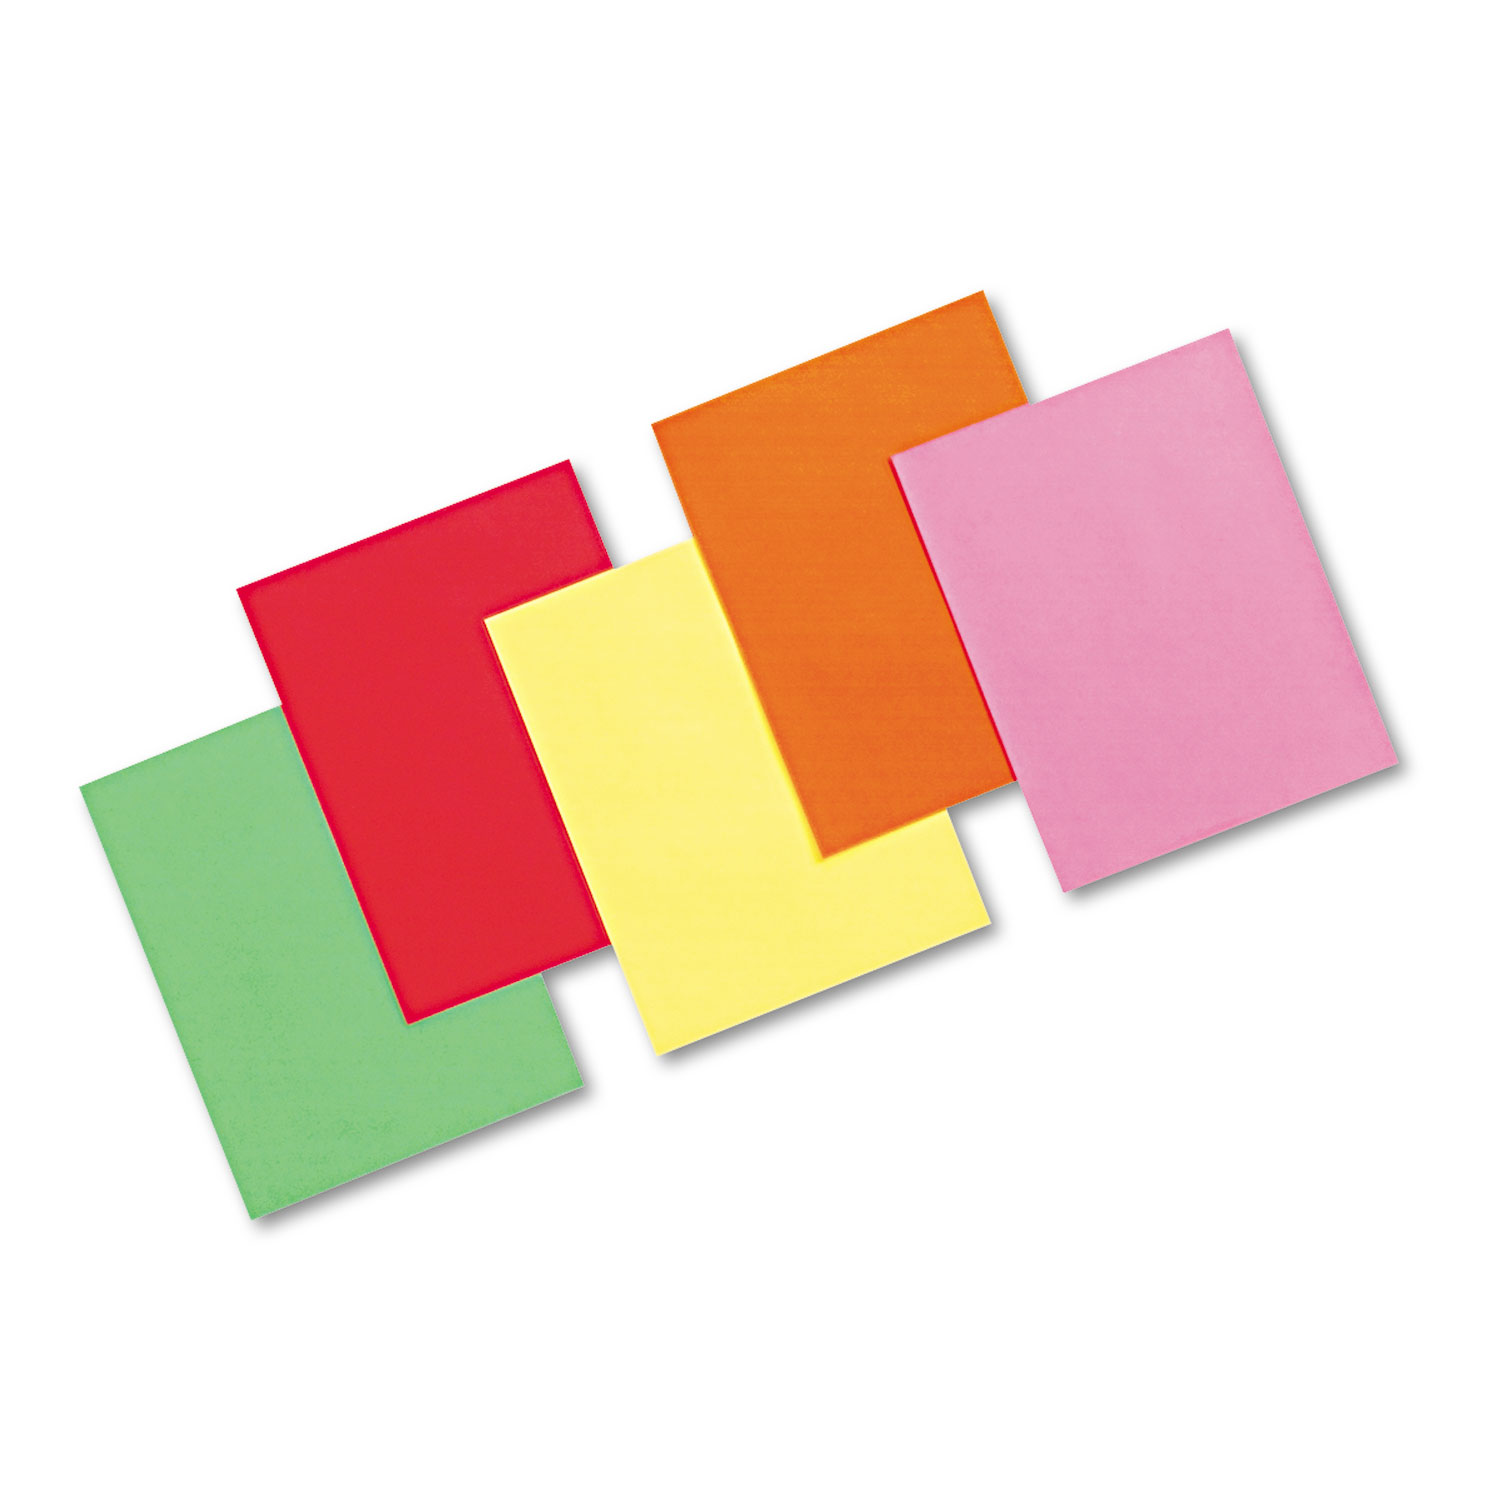  Pacon 101105 Array Colored Bond Paper, 24lb, 8.5 x 11, Assorted Bright Colors, 500/Ream (PAC101105) 